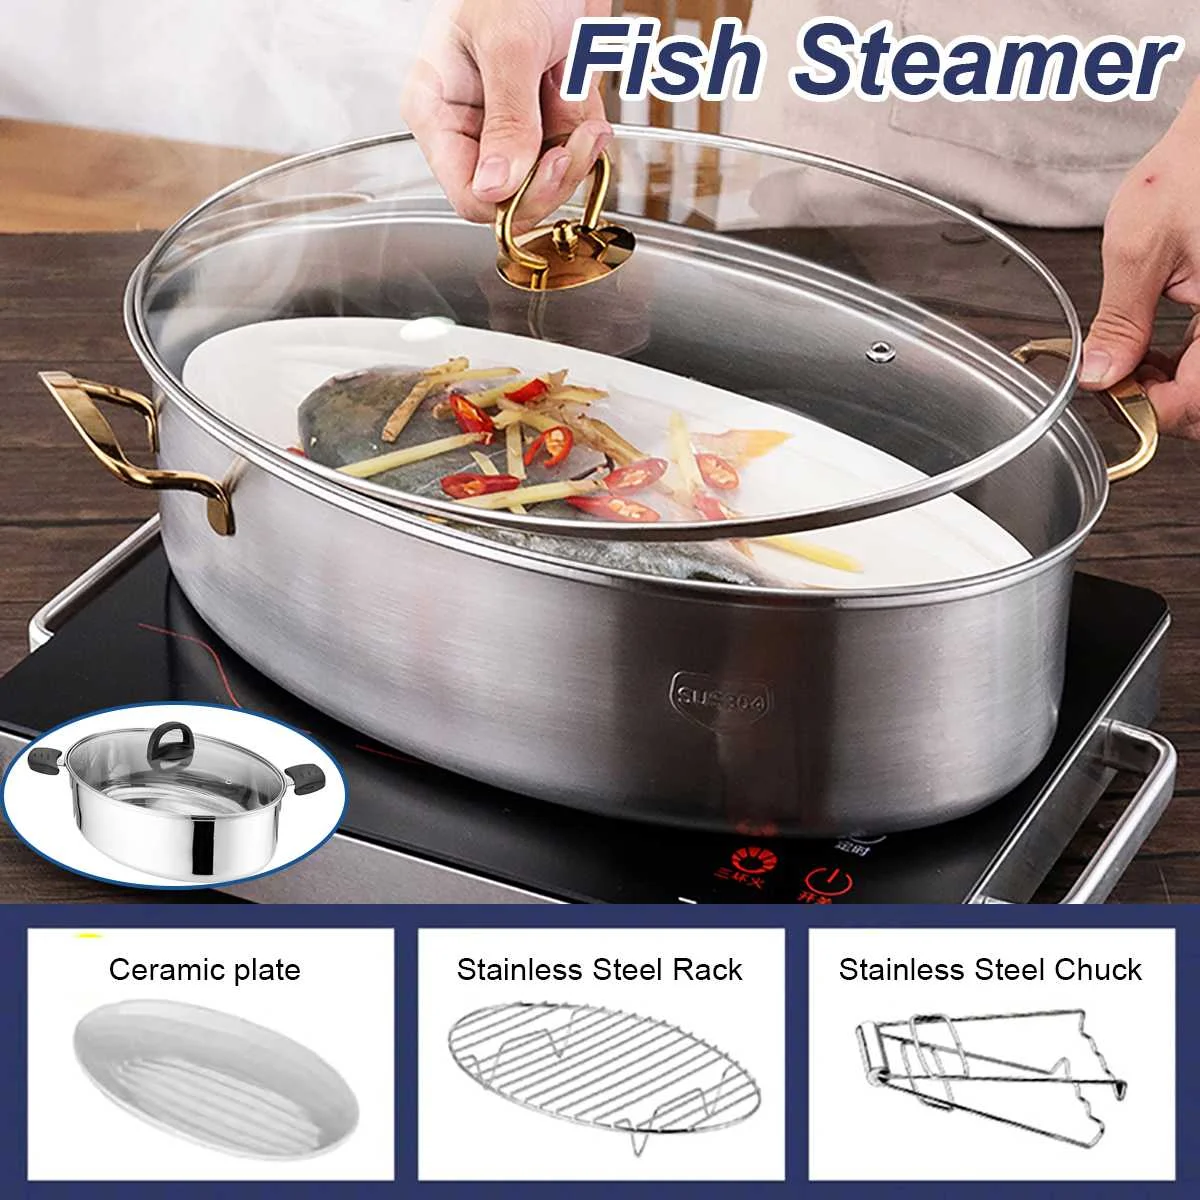 Stainless Steel Fish Steamer Multi-Use Oval Roasting Cookware  Hotpot with Rack Ceramic Pan Chuck Pasta Pot Stockpot Steame Pot